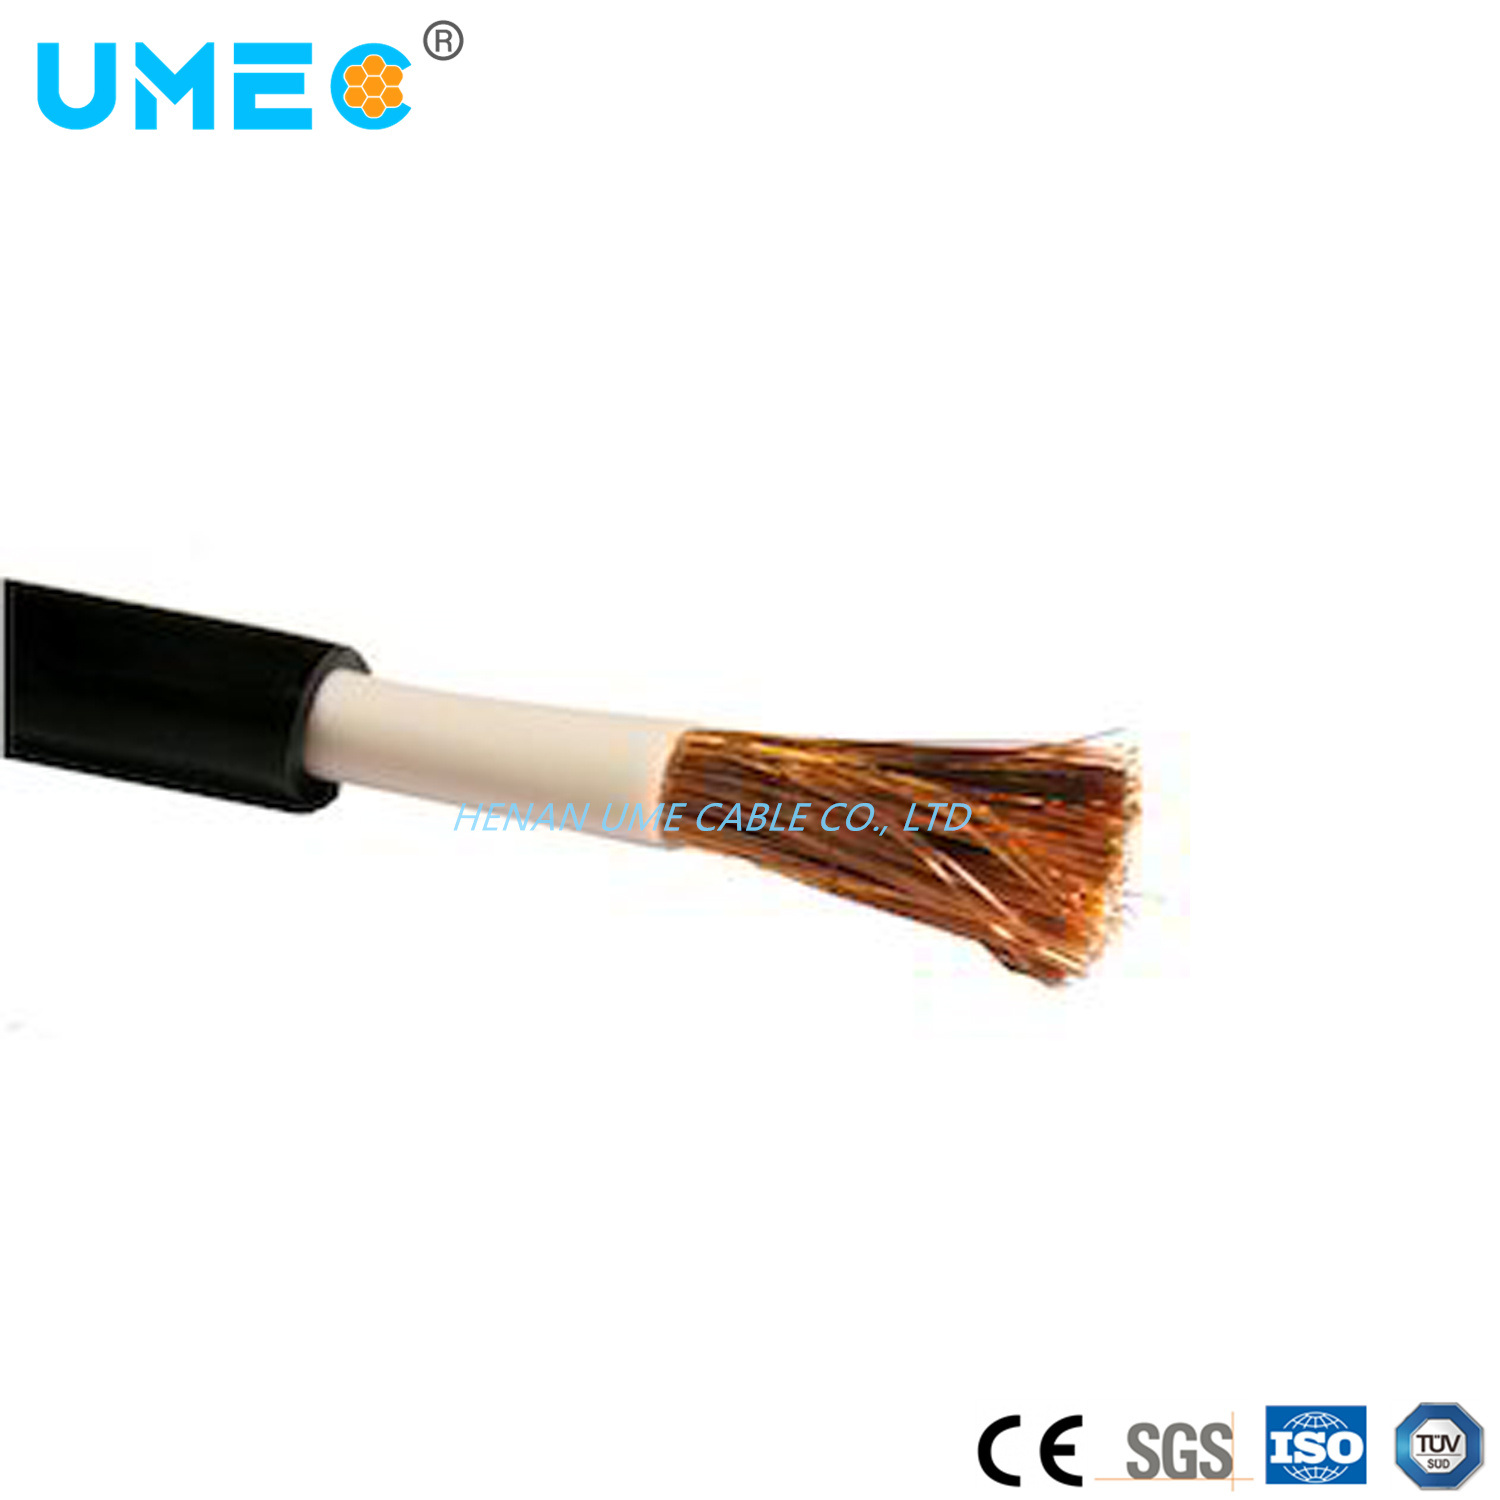 IEC60332 H01n2-D Cable Class 5 Copper Conductor Neoprene Arc Welding Cable 70mm2 95mm2